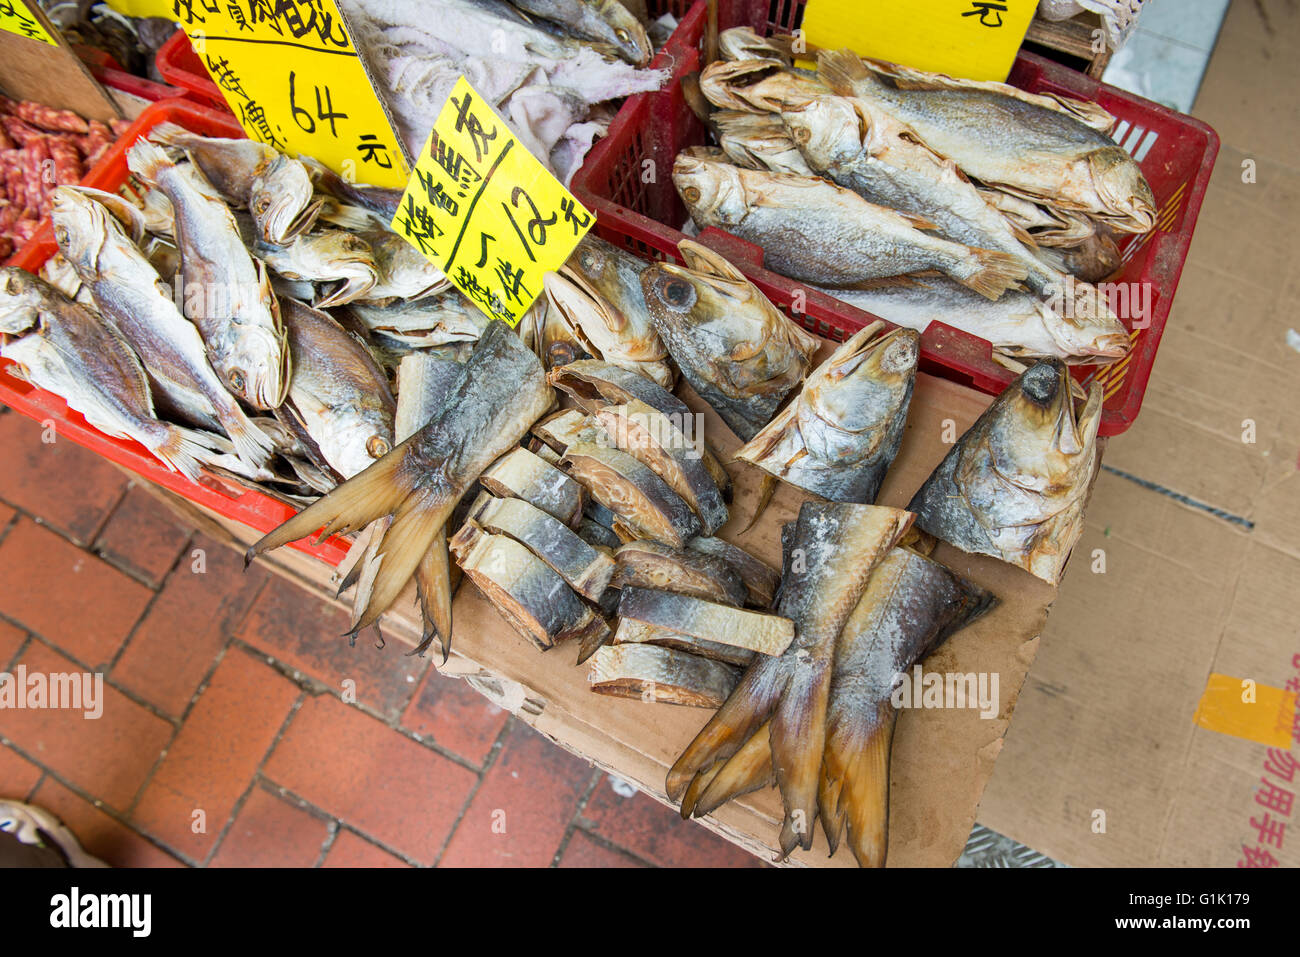 A selection of dry and cut fish outside at market Stock Photo